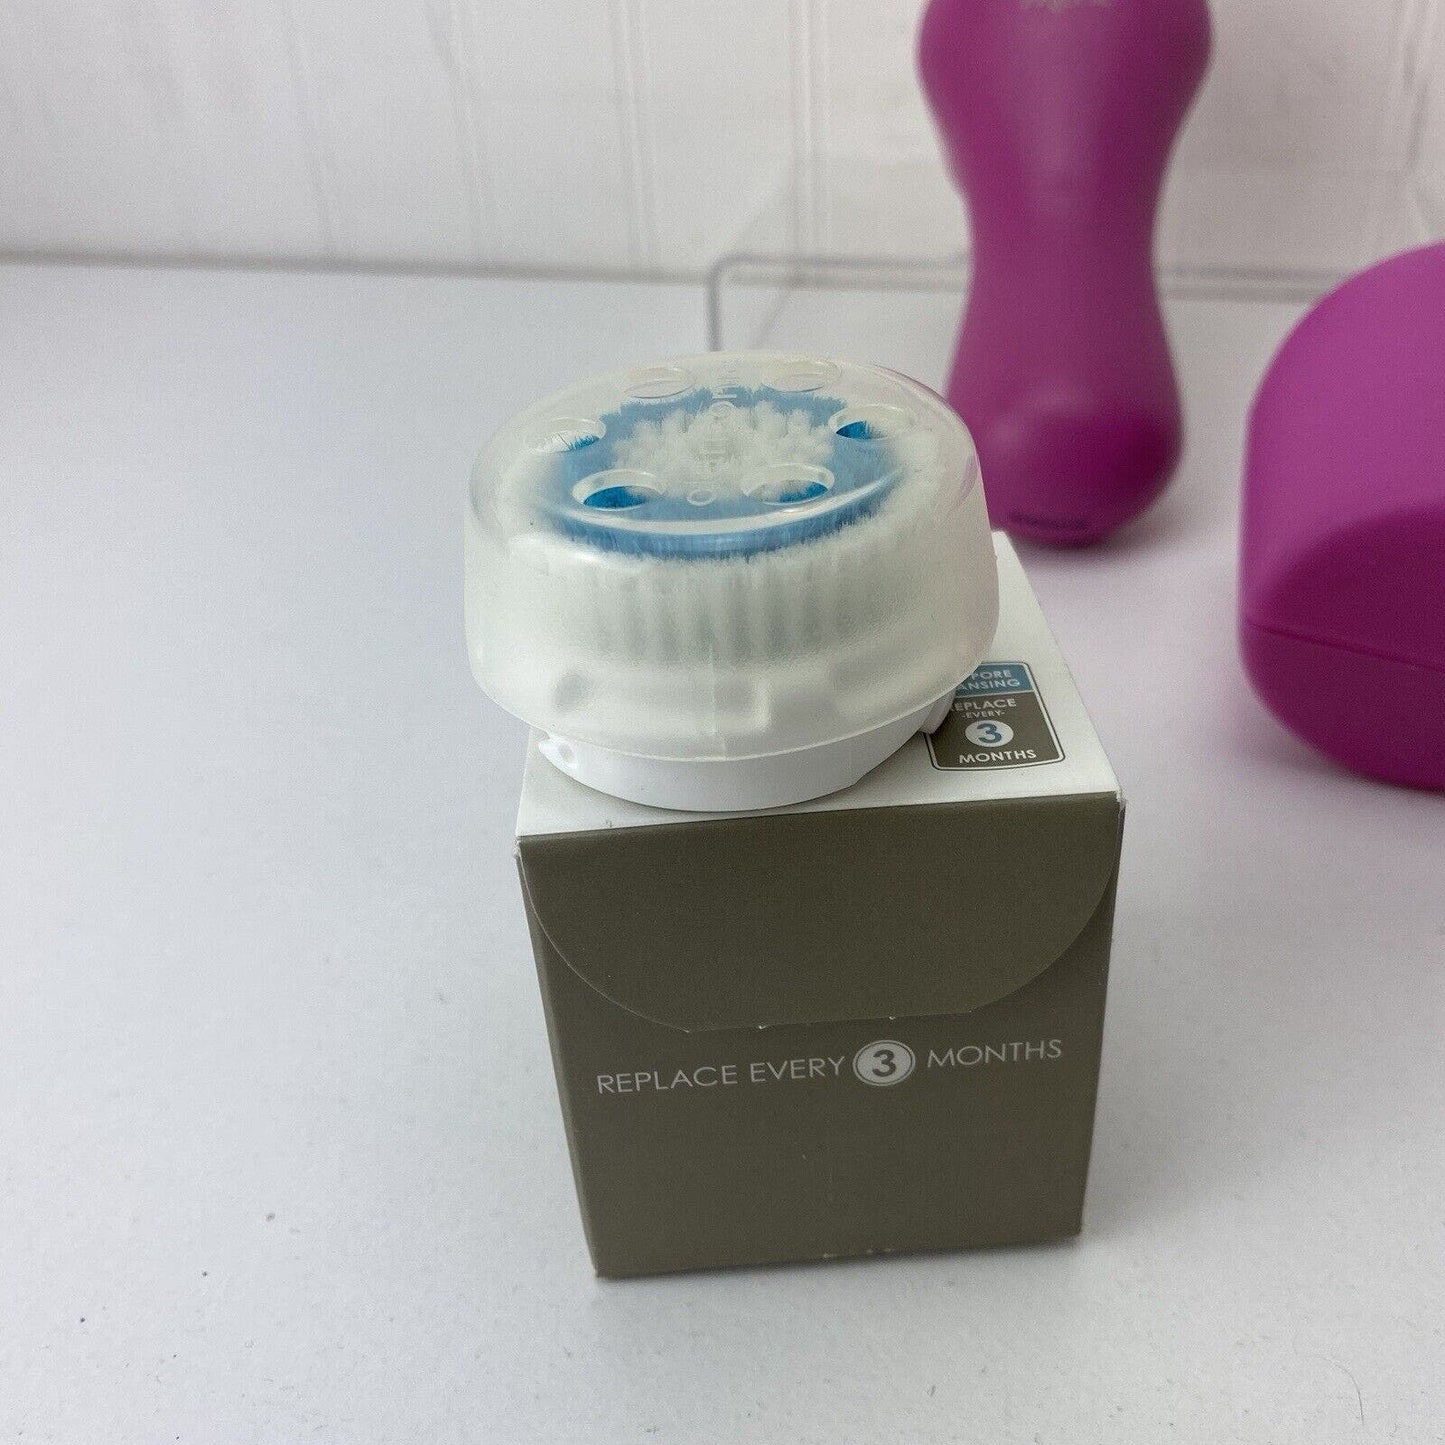 Genuine Clarisonic Mia 2 Pink Sonic Facial Cleansing Brush - New Head & Charger